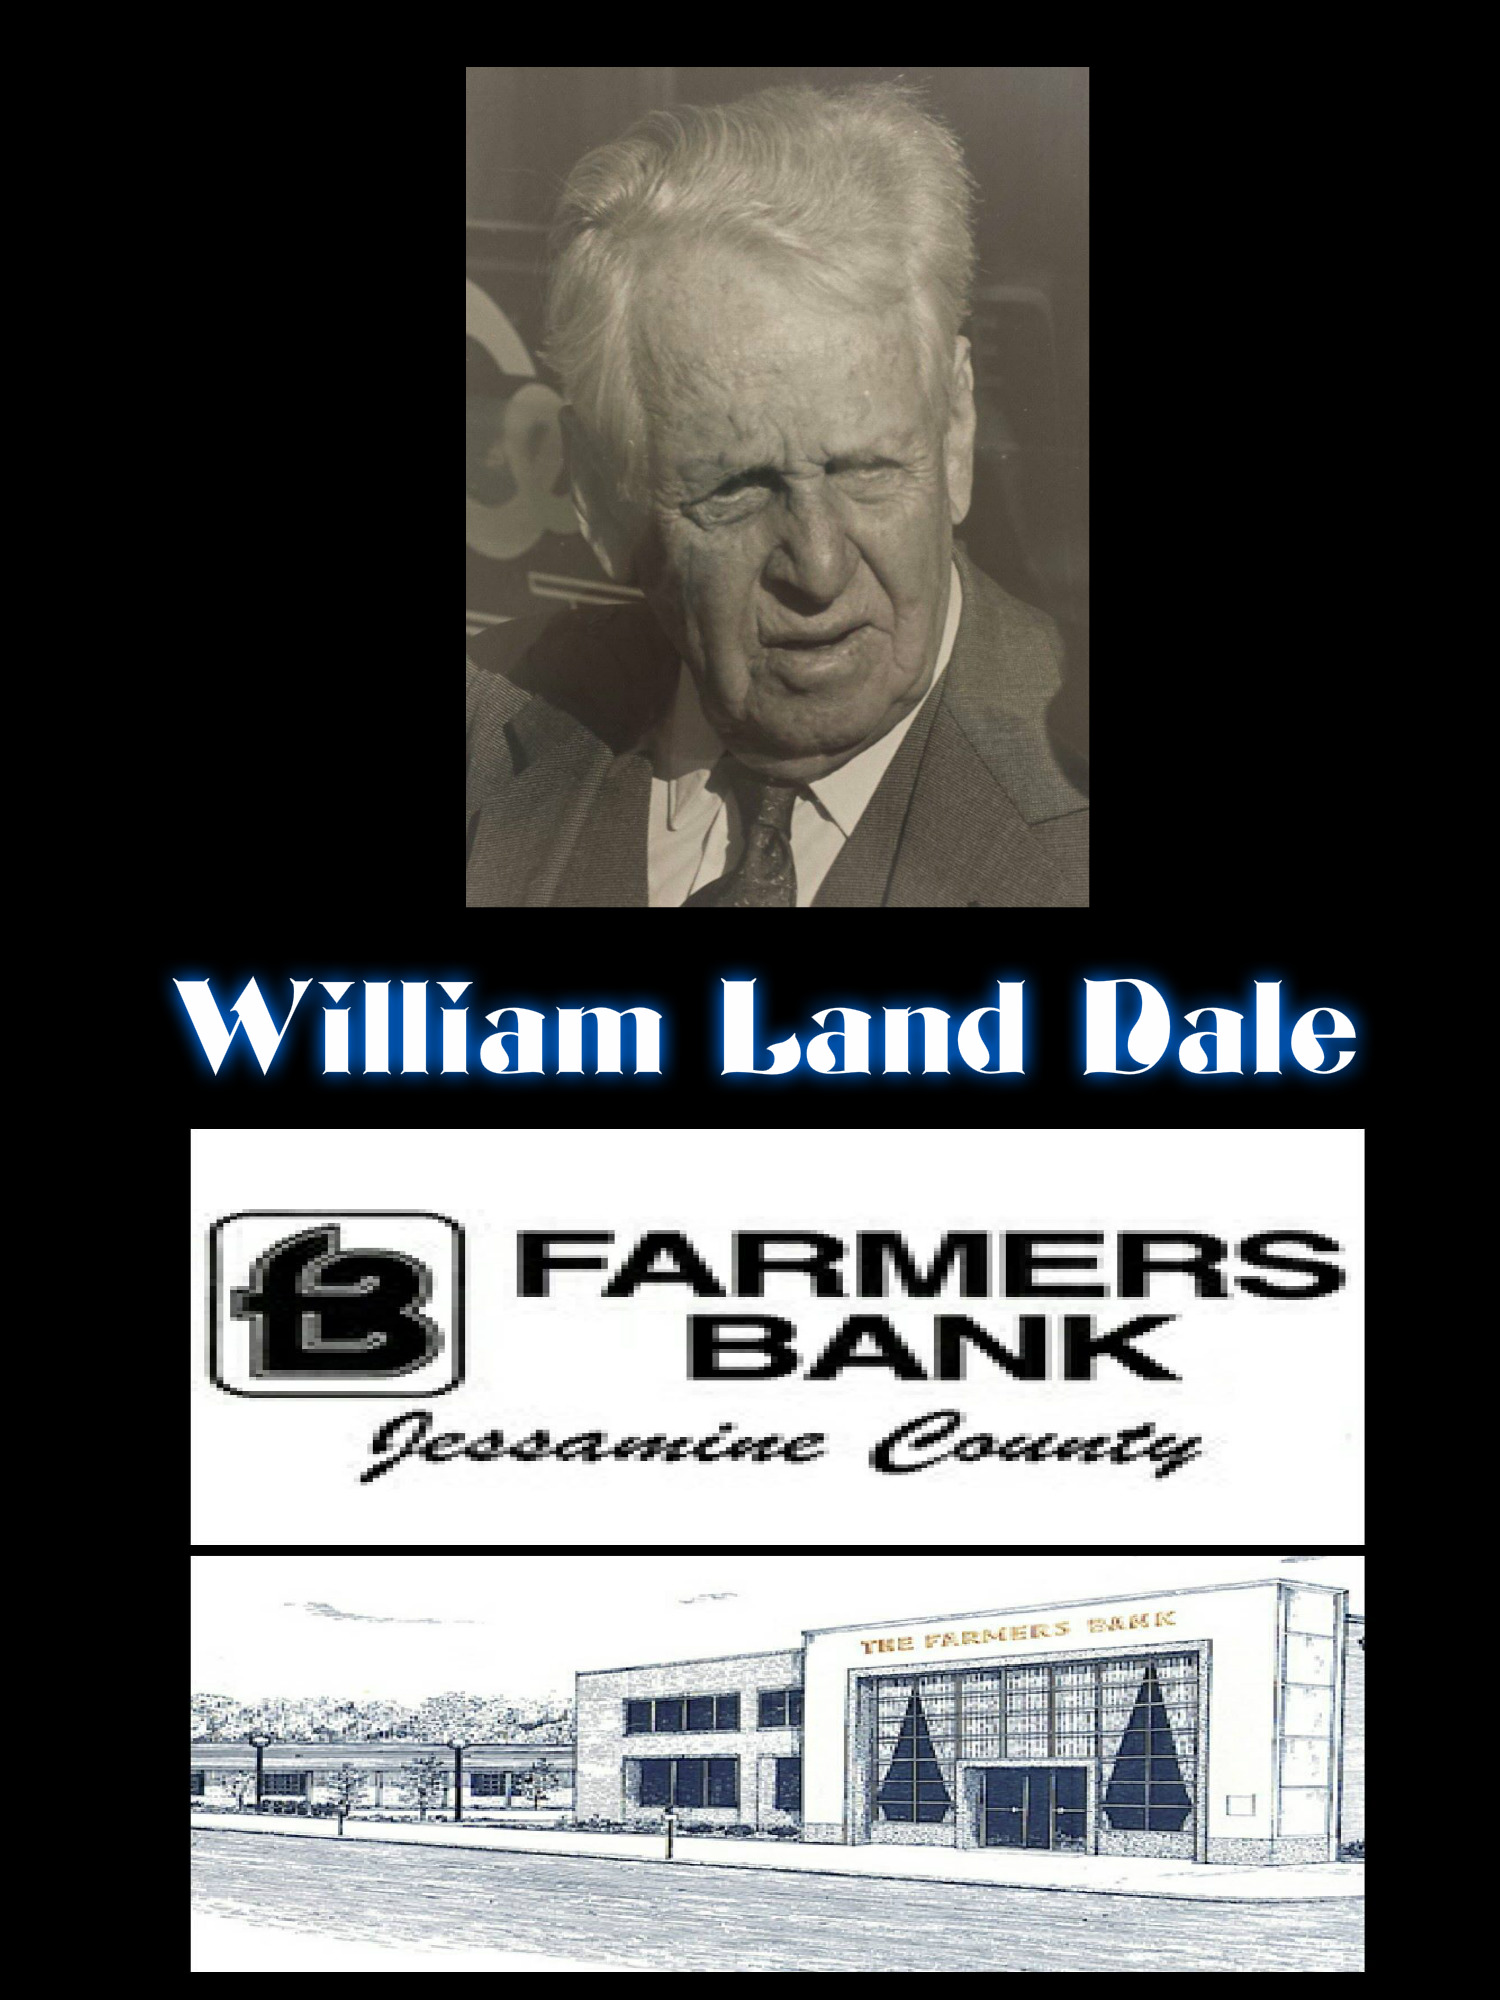 The Farmer's Bank and William S. Dale (with Landy Dale) - 7/29/17 - # 137